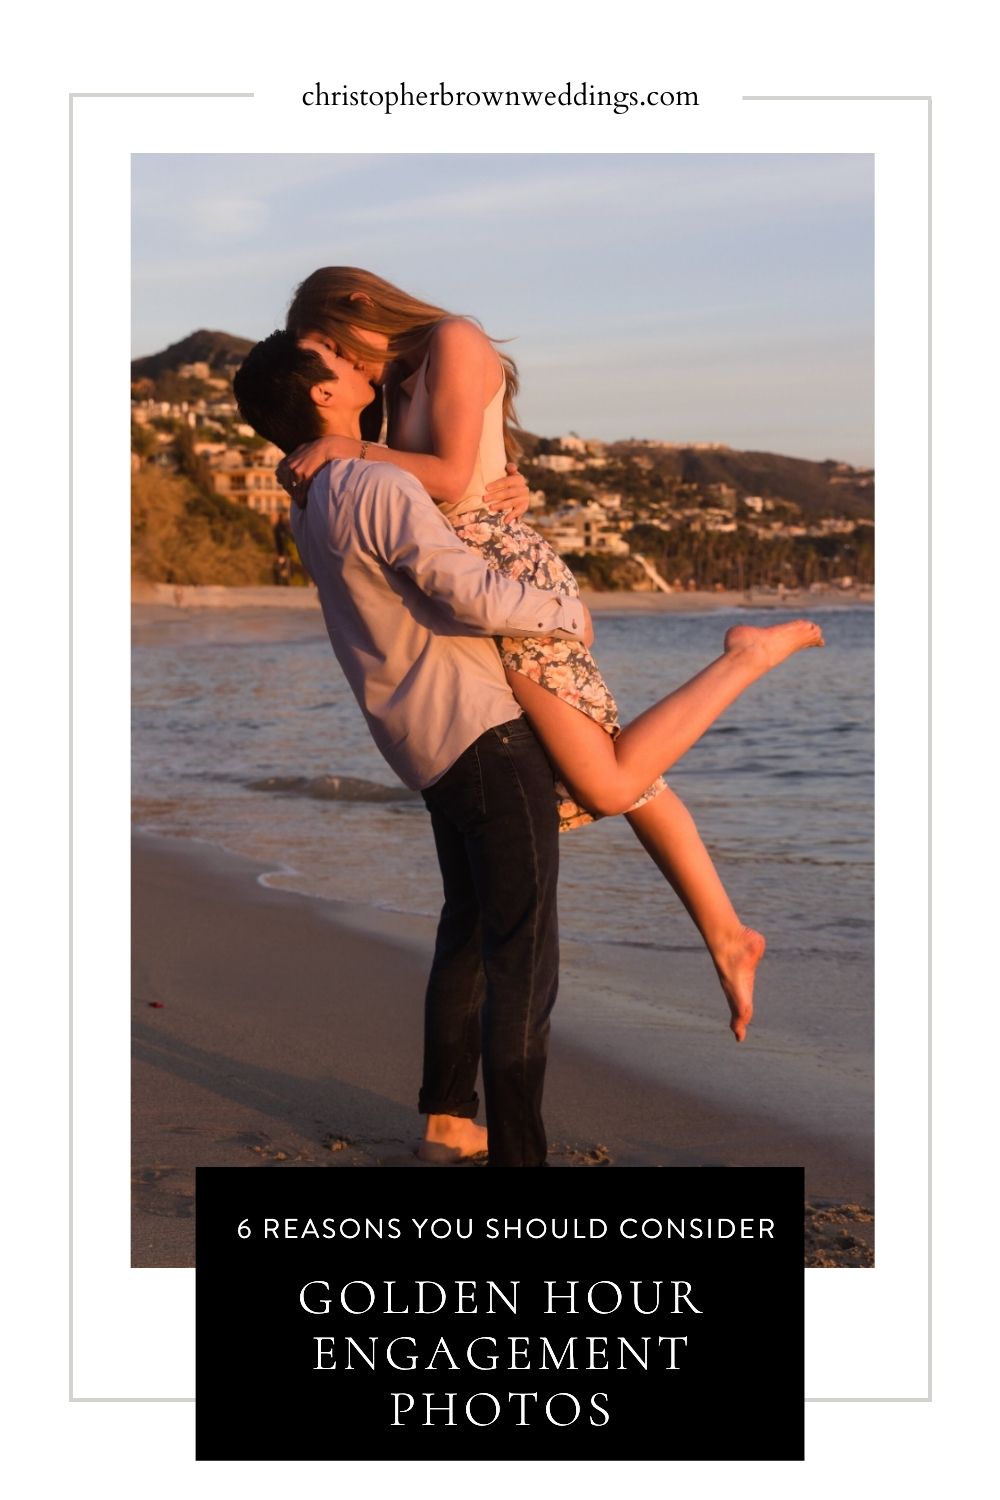 Guy carries his fiance as they share a kiss along the beach; image overlaid with text that reads 6 Reasons You Should Consider Golden Hour Engagement Photos